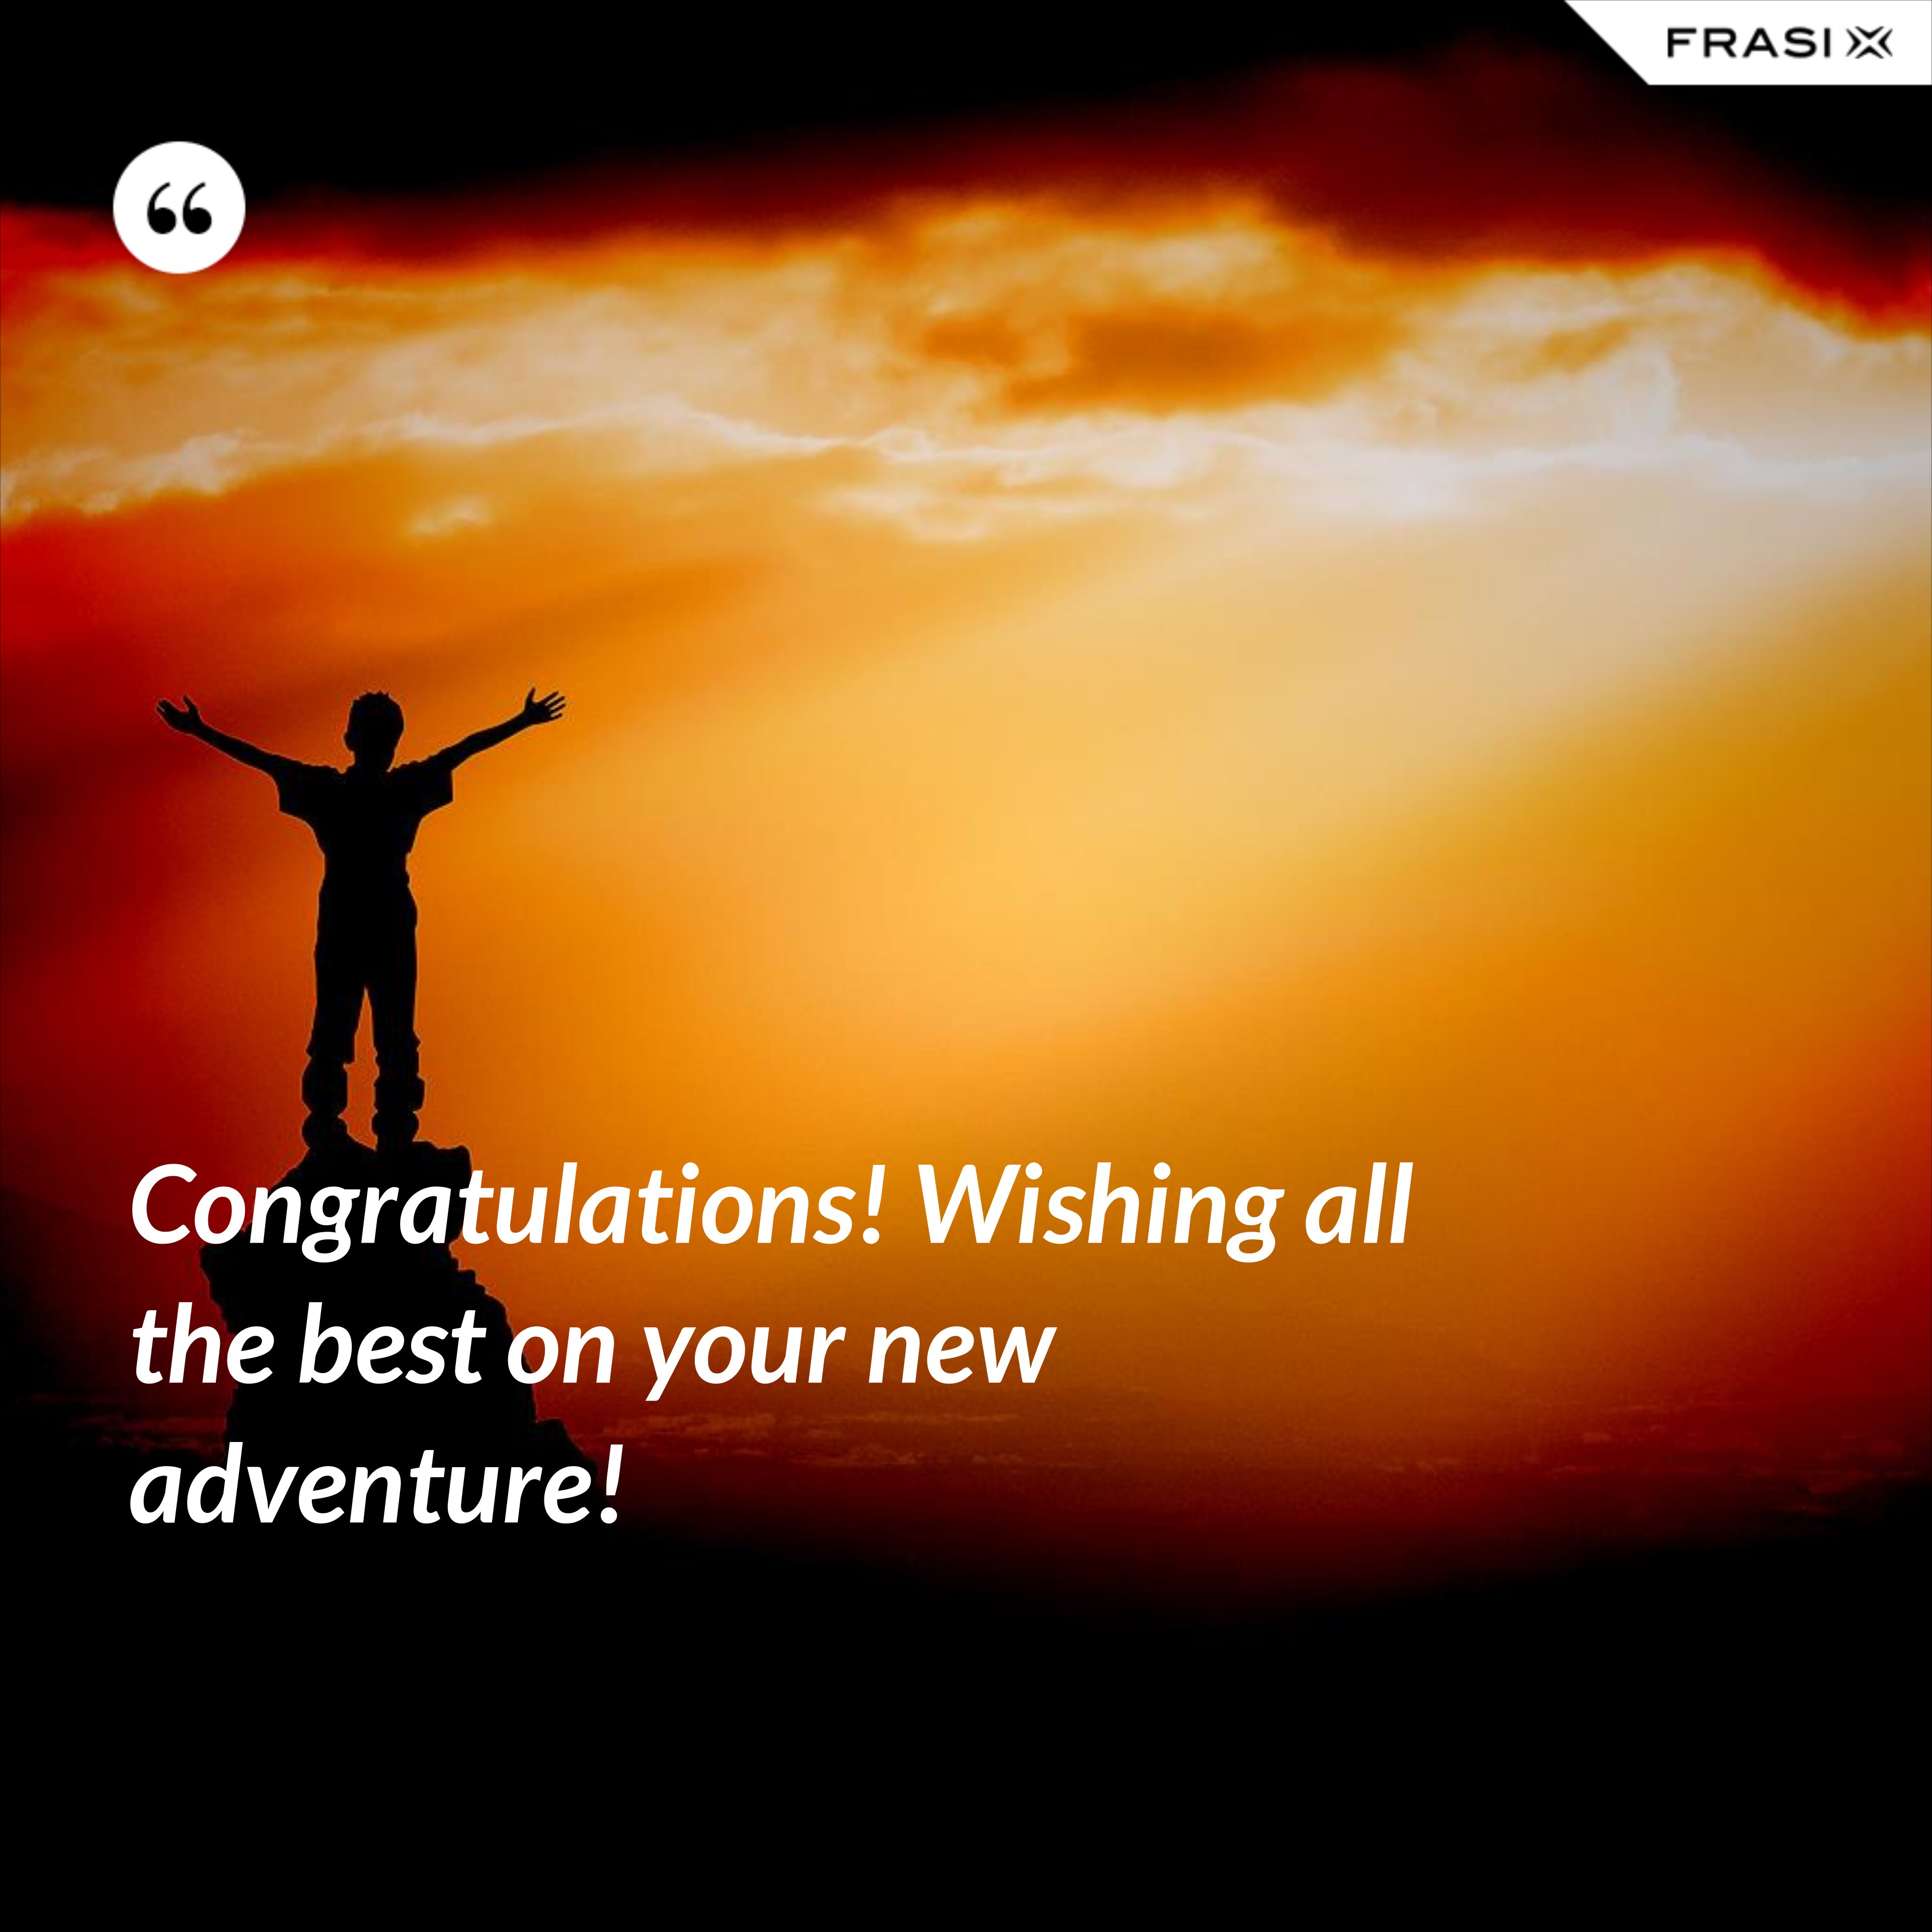 Congratulations! Wishing all the best on your new adventure! - Anonimo